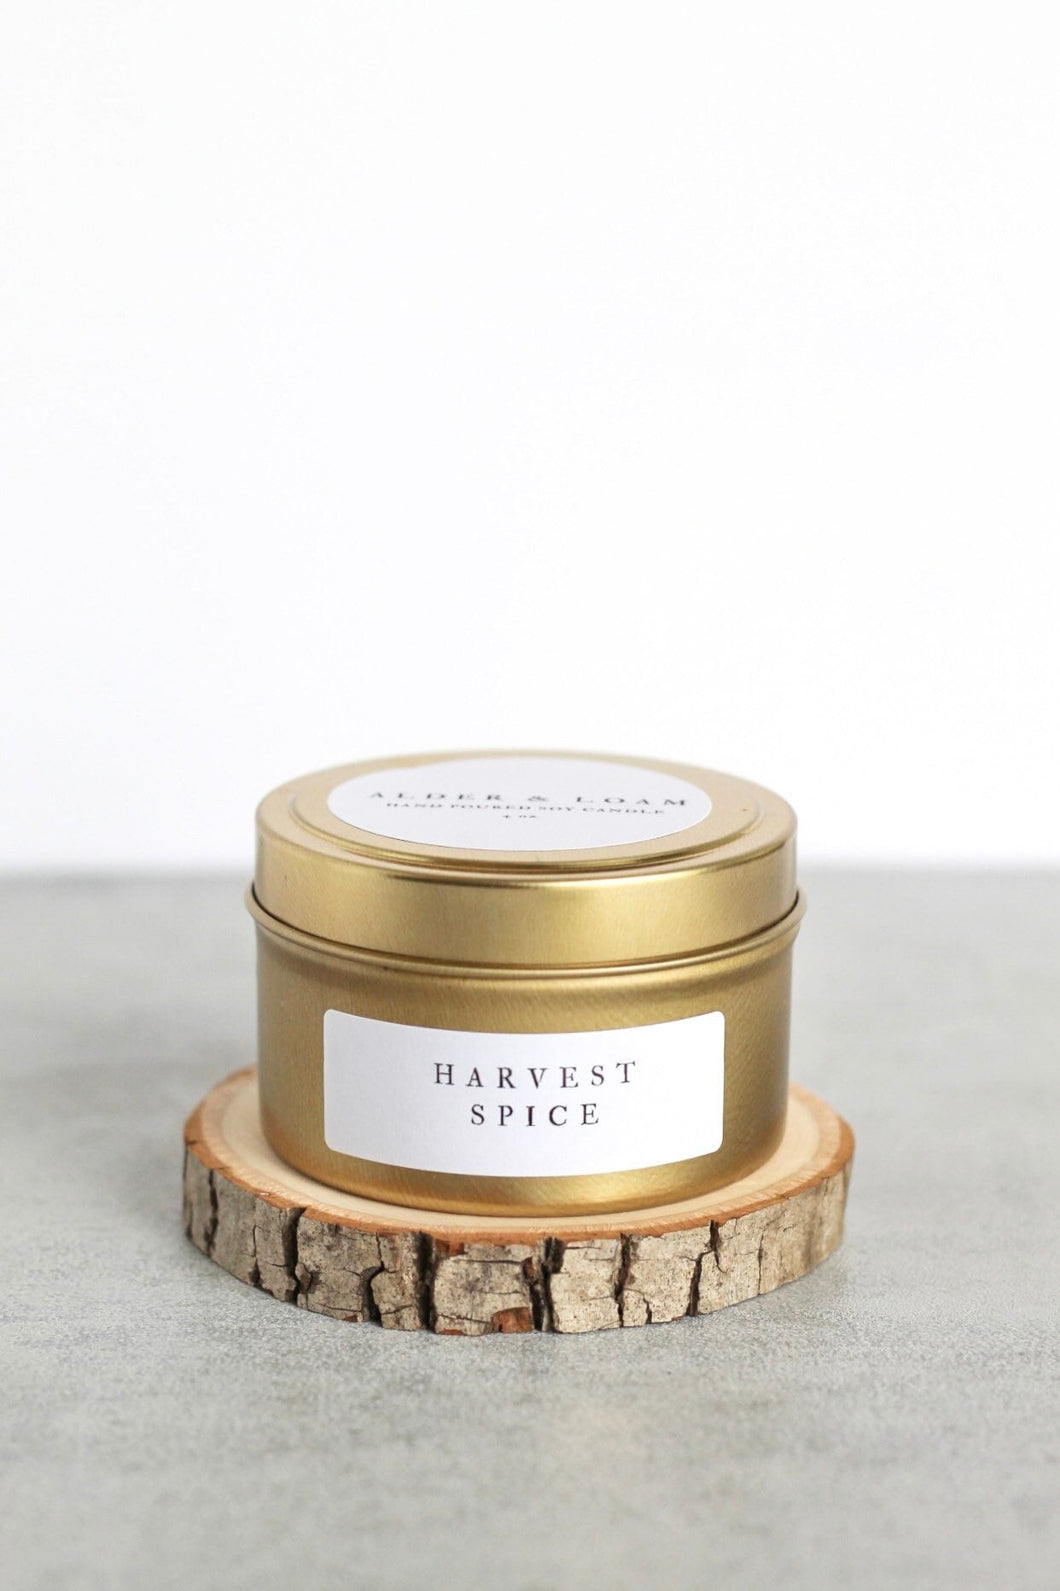 Harvest Spice Soy Candle, Hand Poured, Natural, Eco Friendly, Earthy Scent, Fall Candle, 4 oz Tin